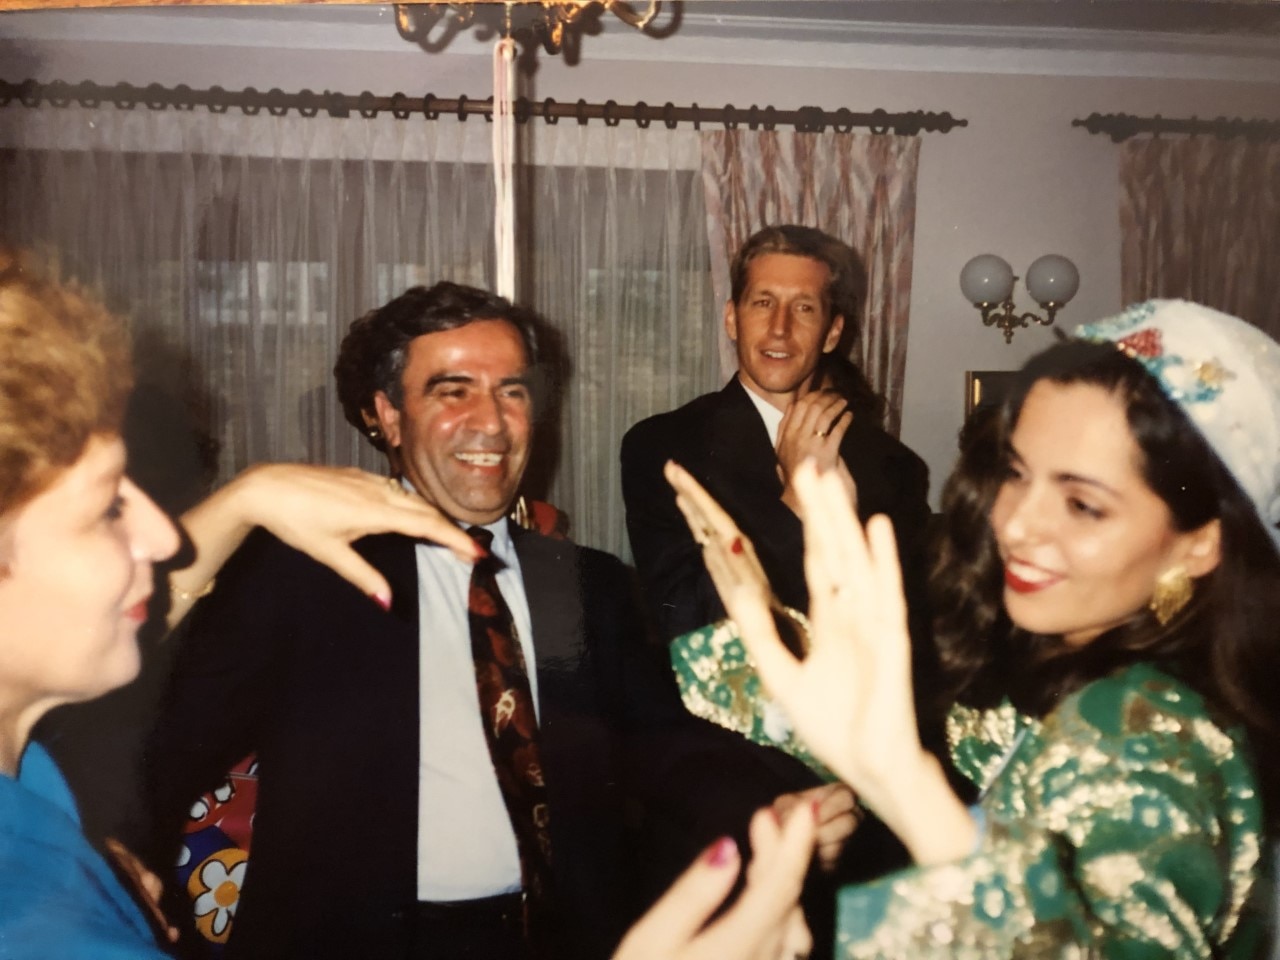 Maya's mother Atousa, father Peter, and grandparents Fozieh and Ali dancing.